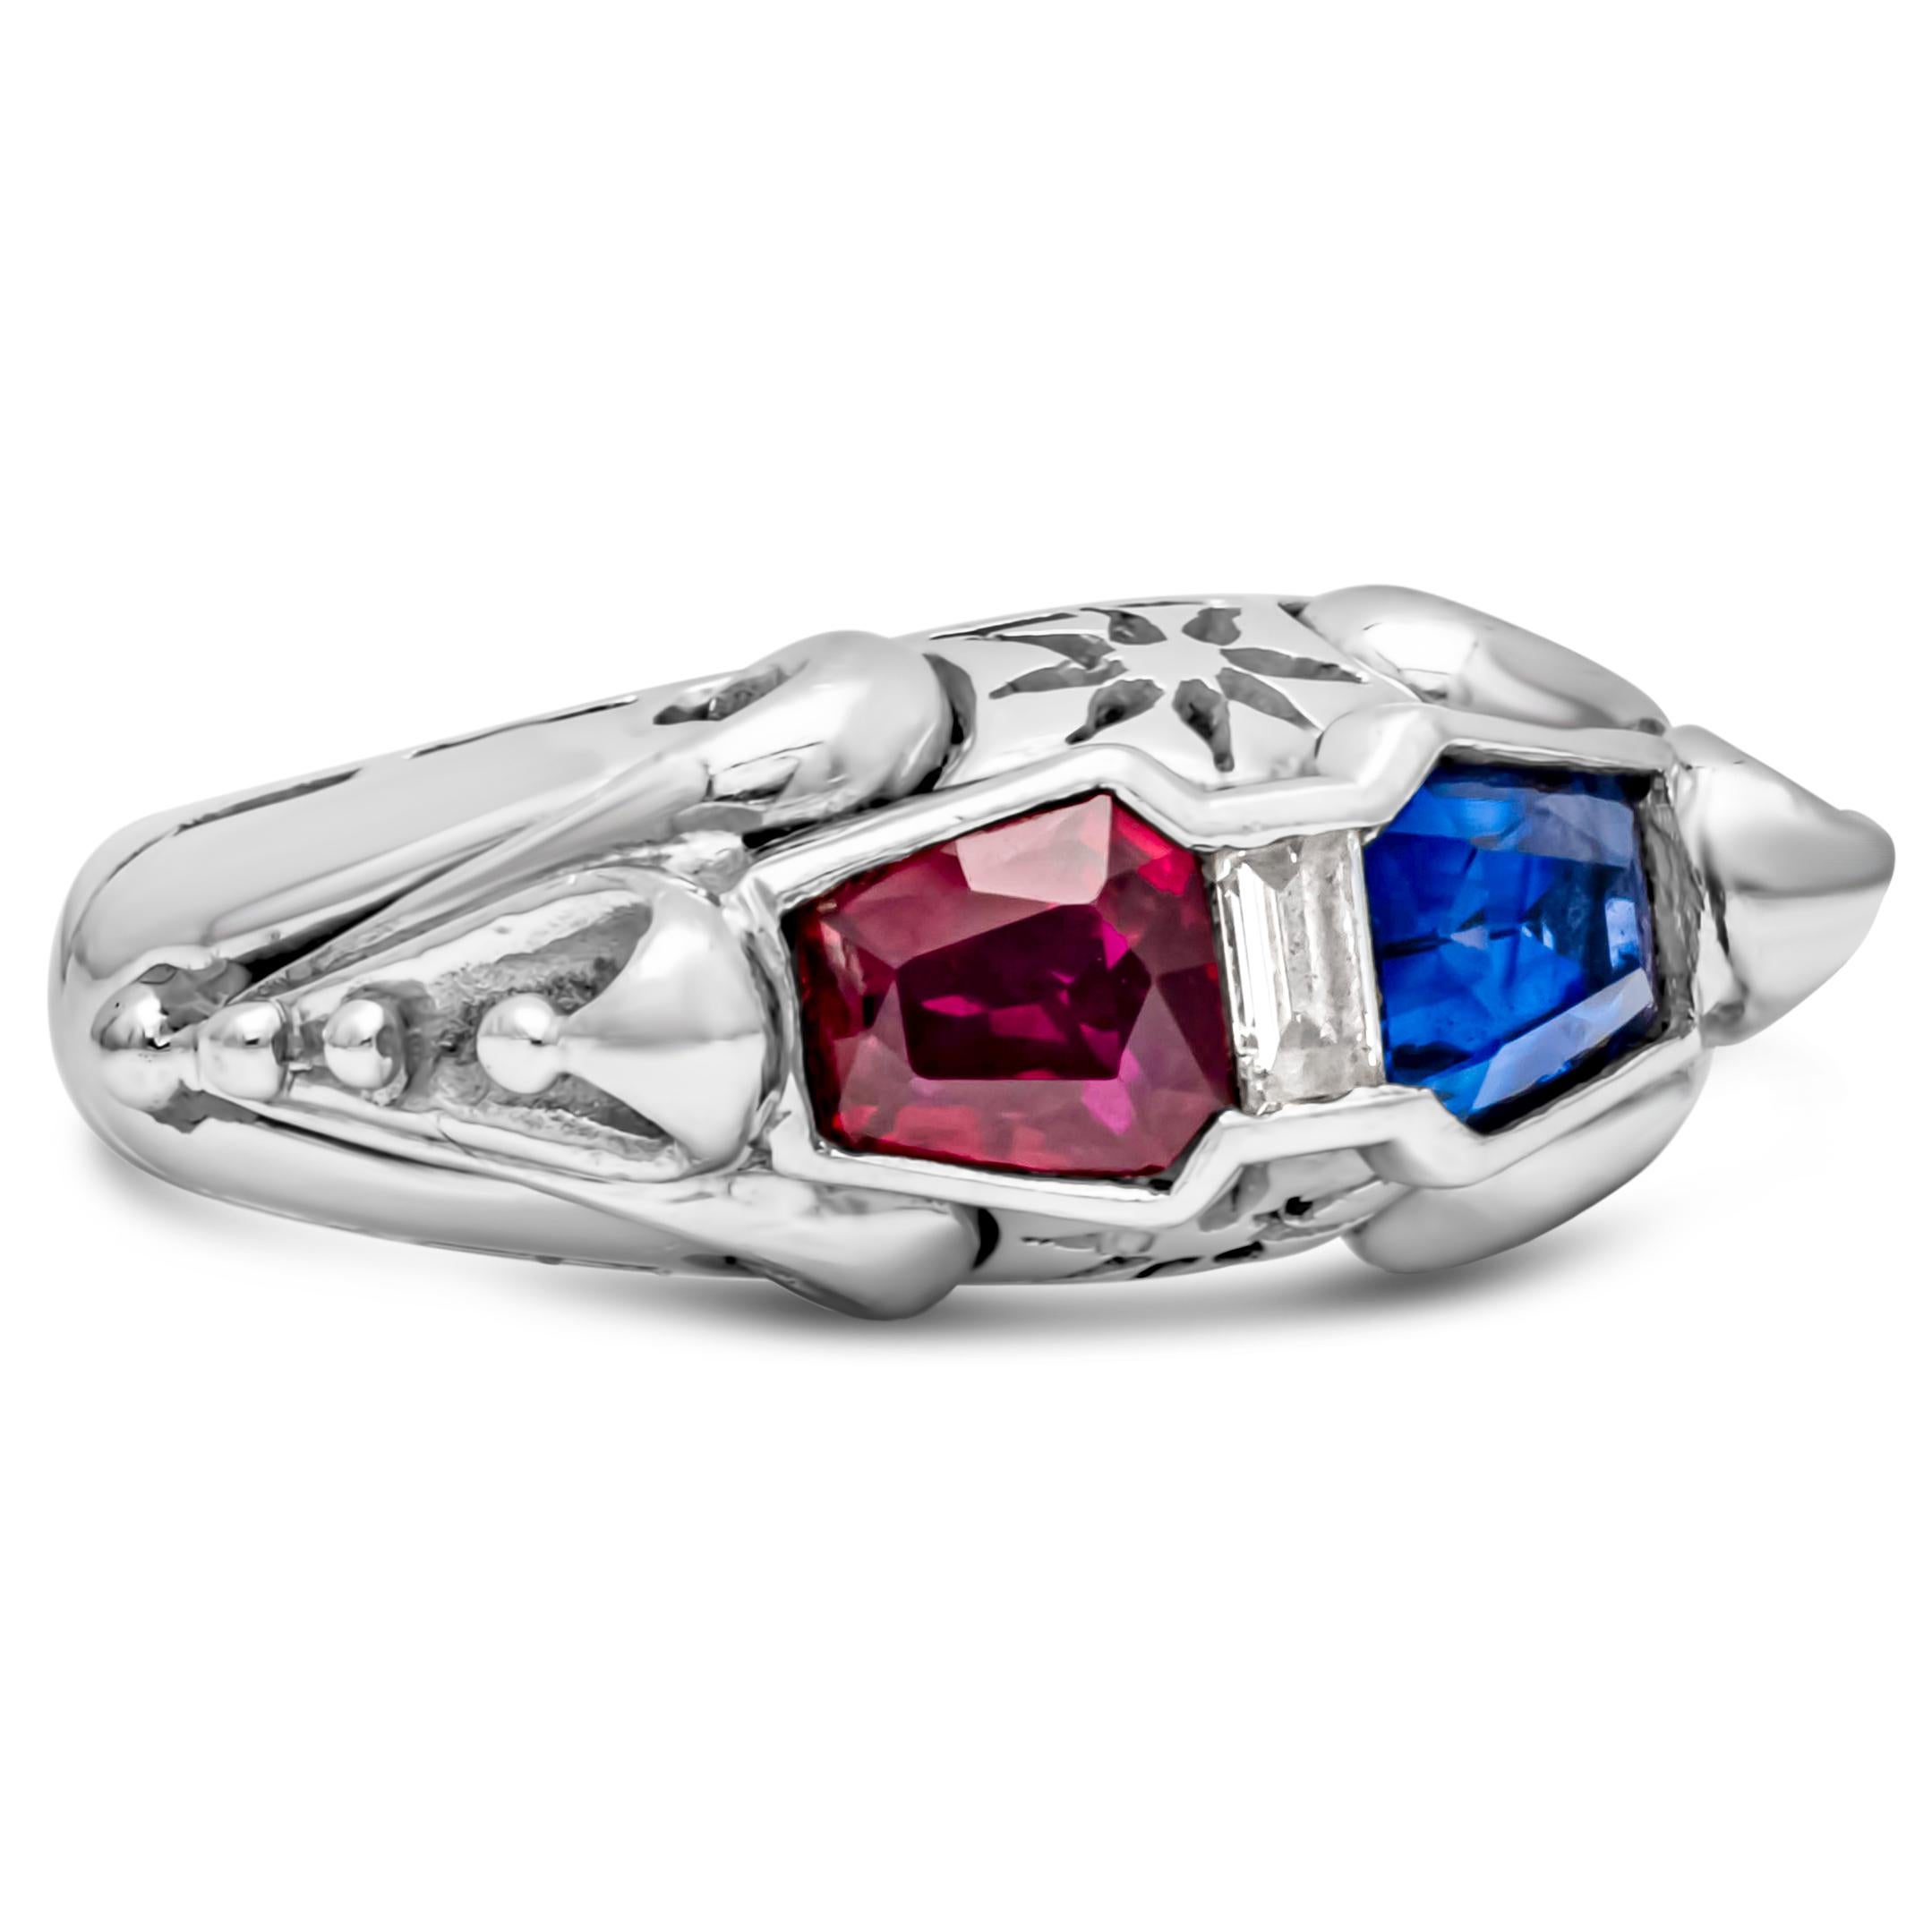 GIA Certified 1.6 Carats Total Trapezoid Cut Ruby & Sri Lanka Blue Sapphire Ring For Sale 1